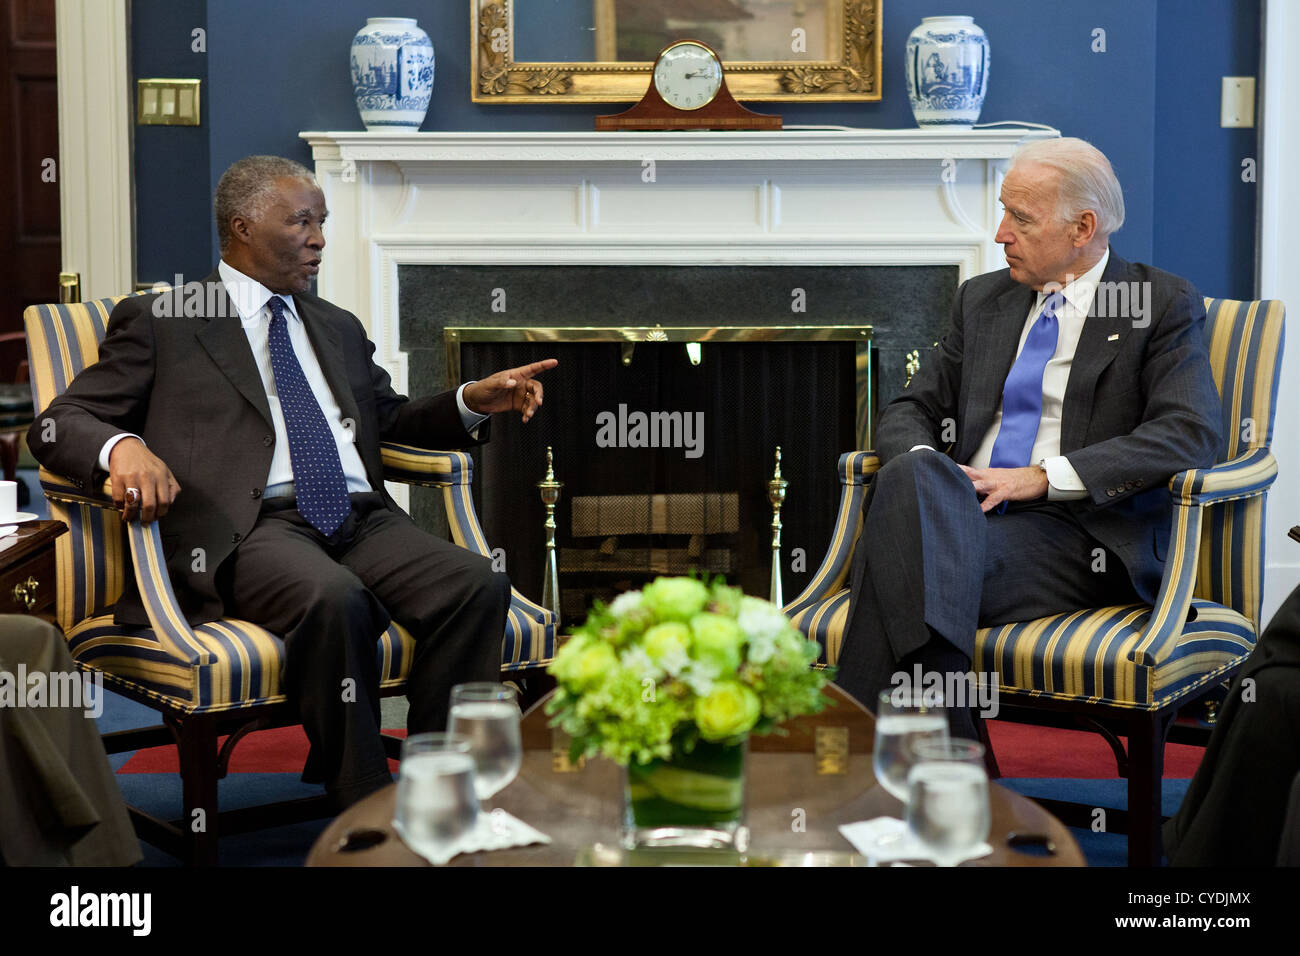 Vice President Joe Biden talks with Former President of South Africa Thabo Mbeki during a meeting with members of the African Union High Level Implementation Panel on Sudan April 18, 2011 in his West Wing Office at the White House. Stock Photo